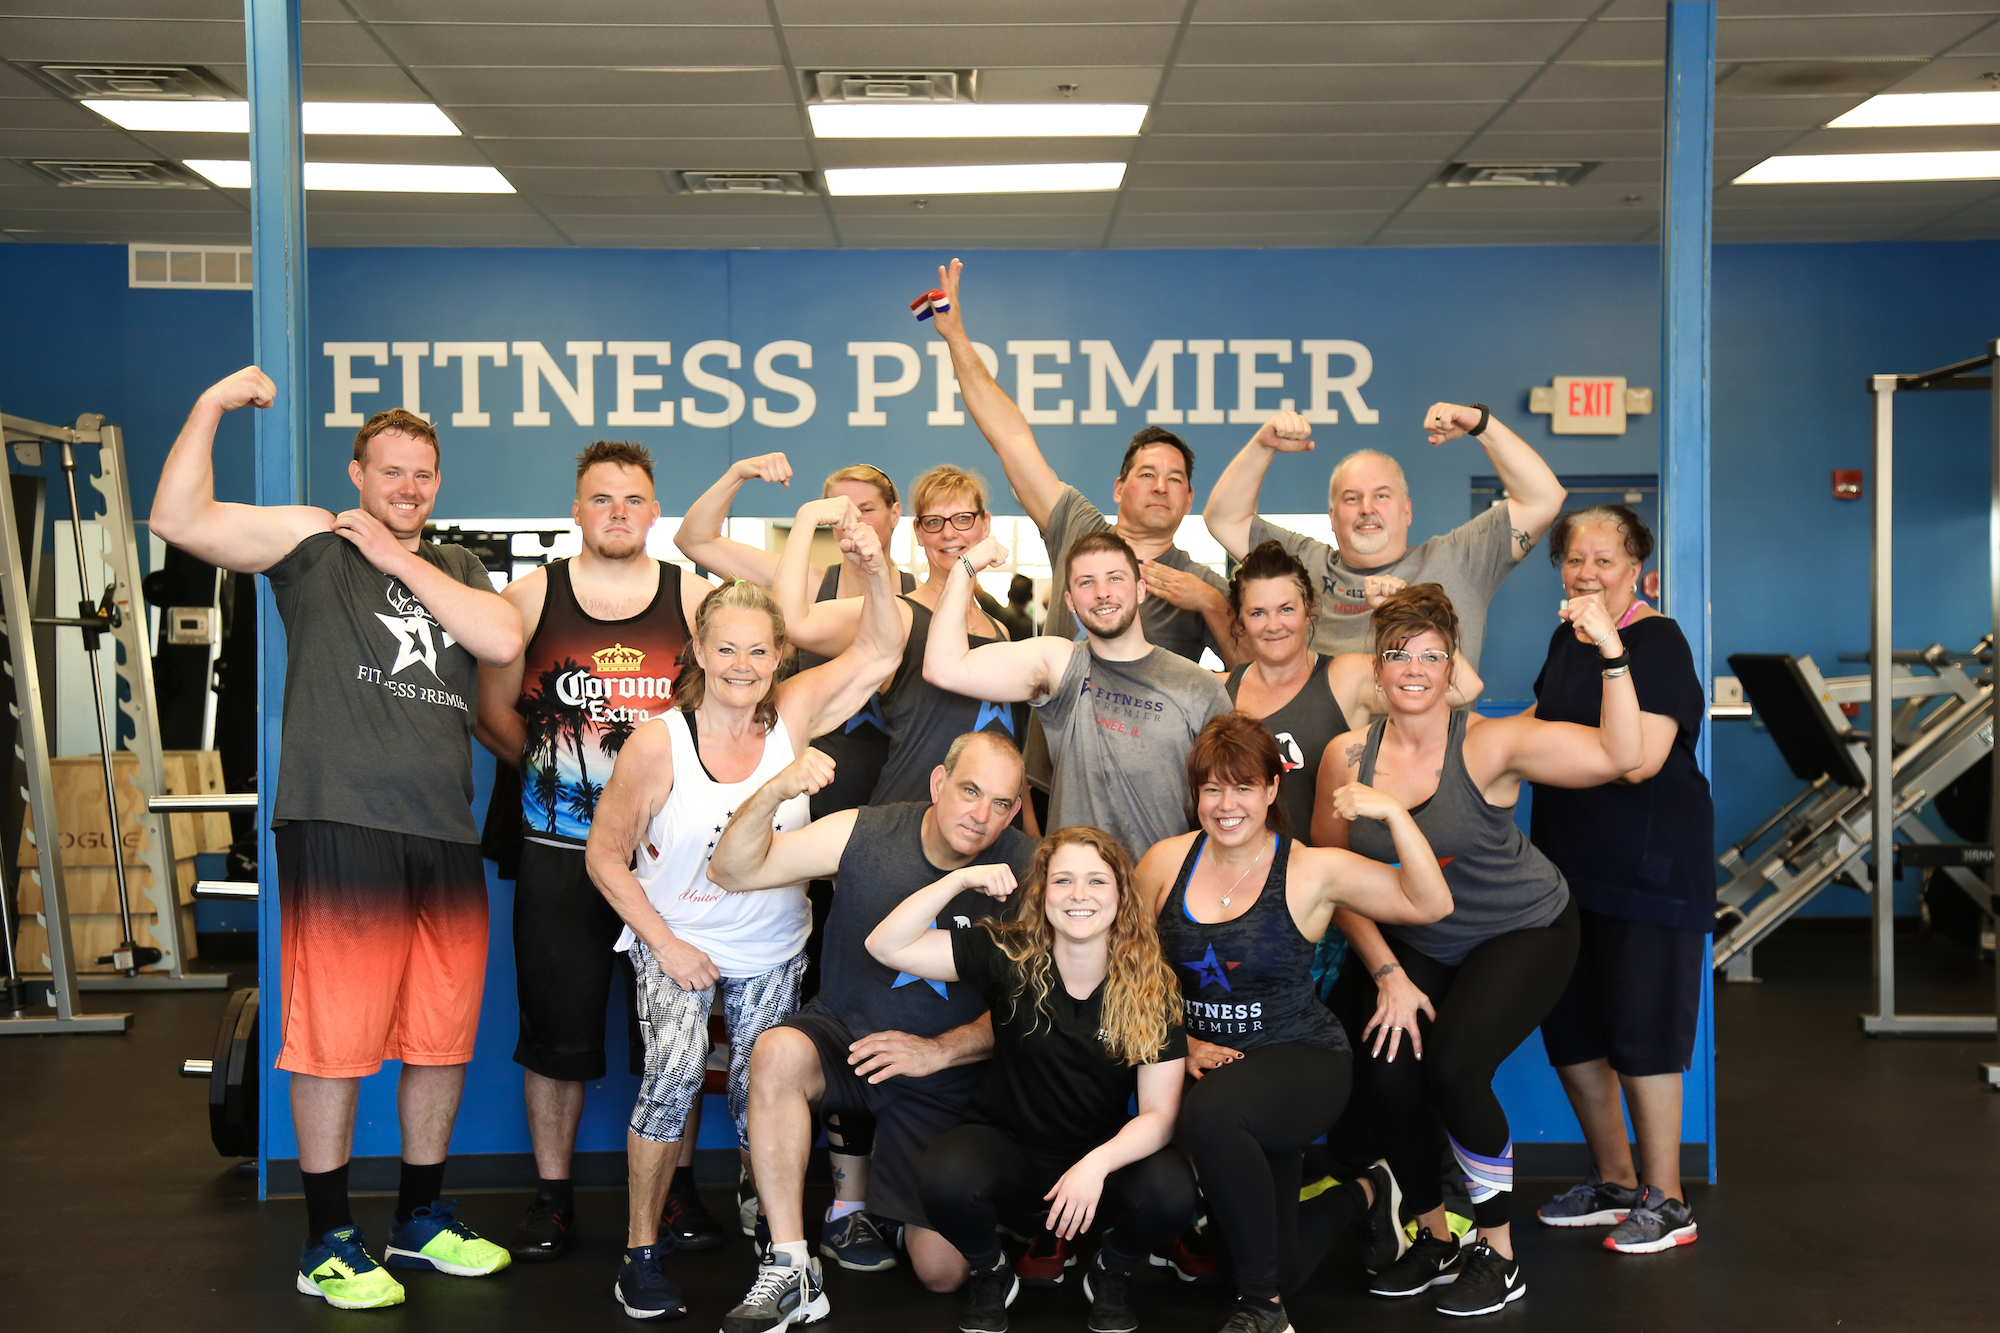 Member Events at Fitness Premier Clubs